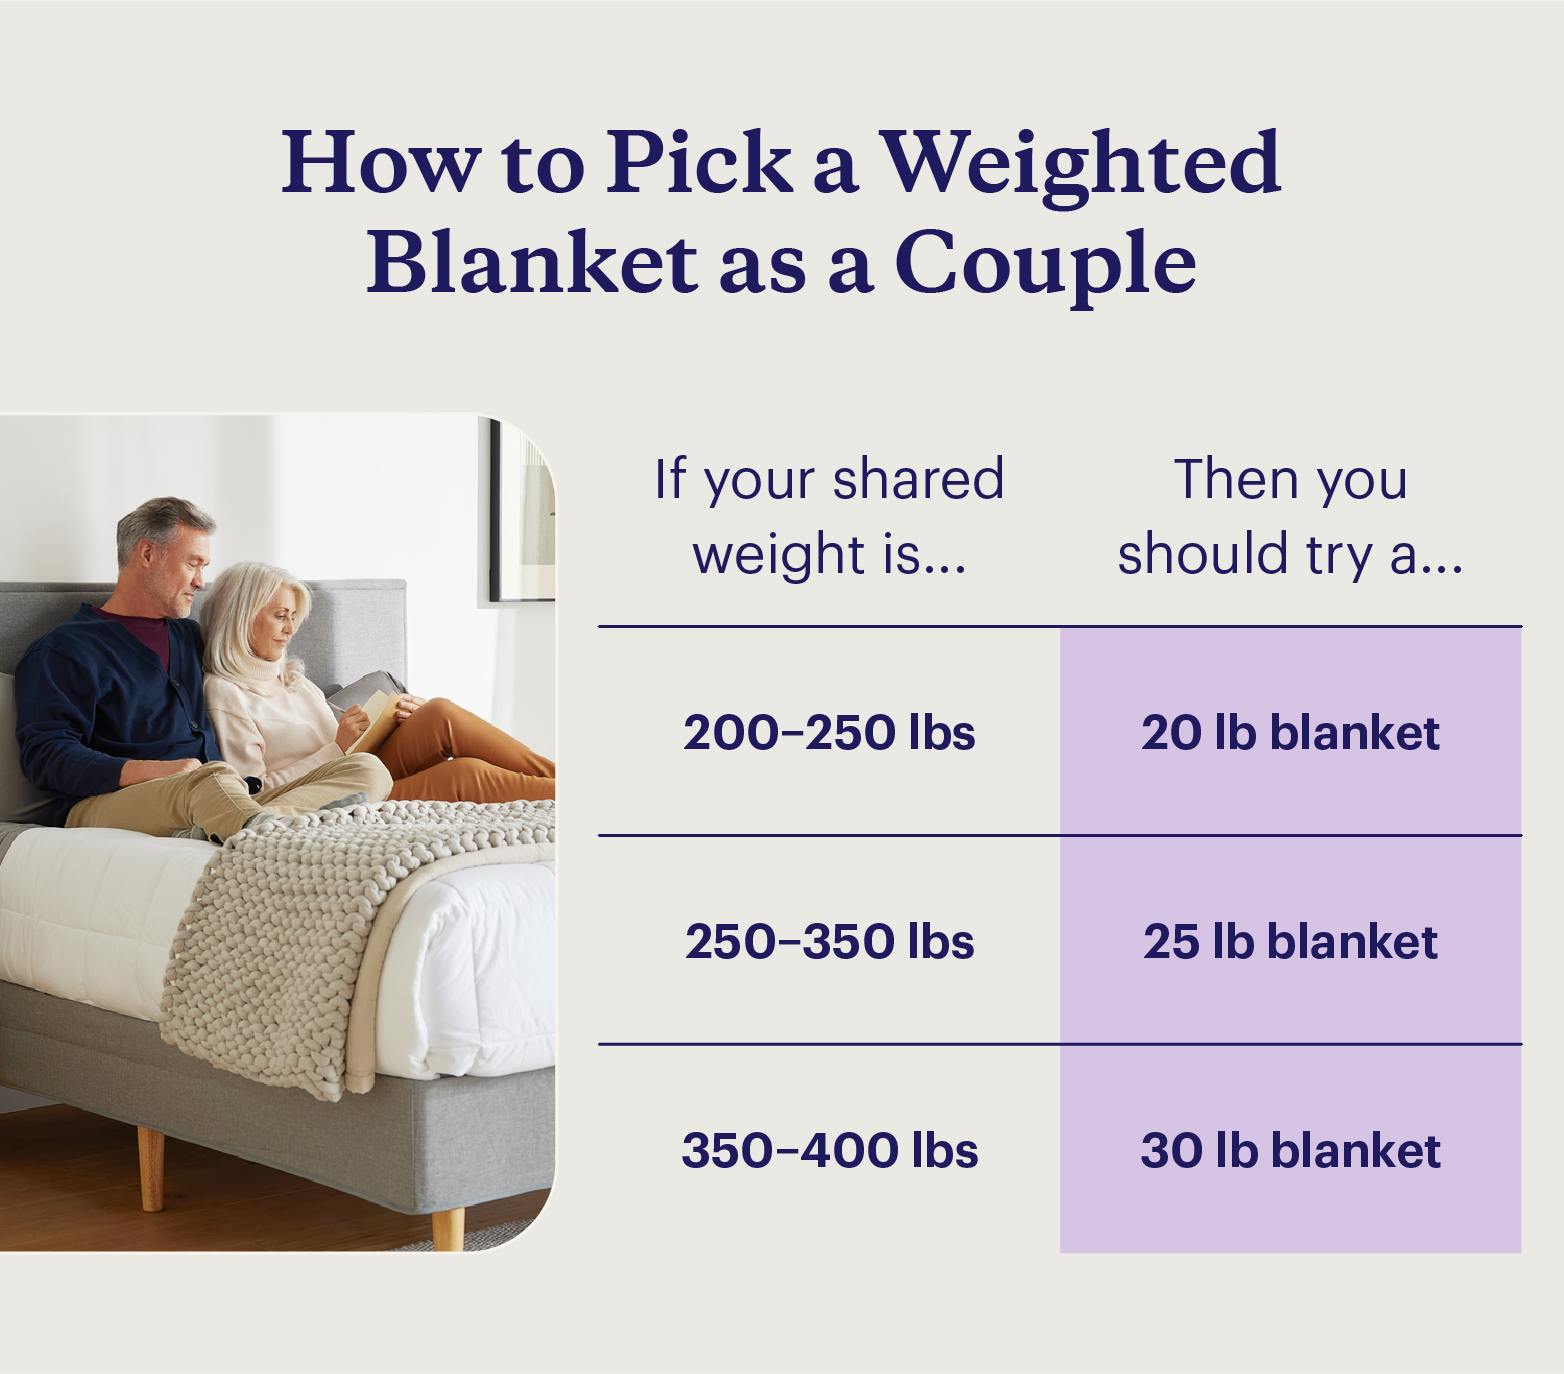 Chart that shows shared weight between a couple and the corresponding blanket weight they should choose.